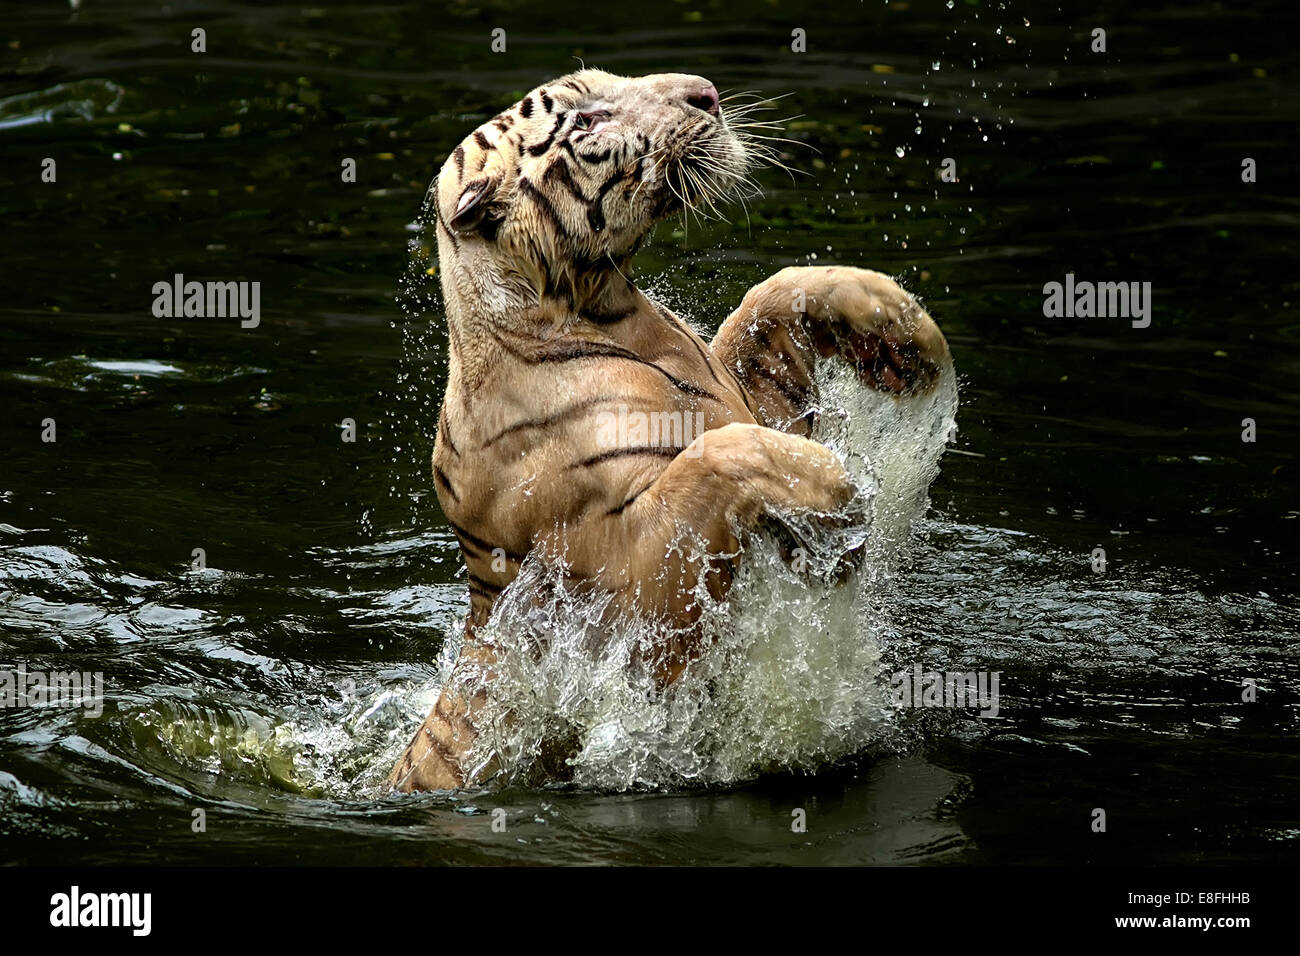 Indonesia, Depok, Tiger jumping from water to catch food Stock Photo